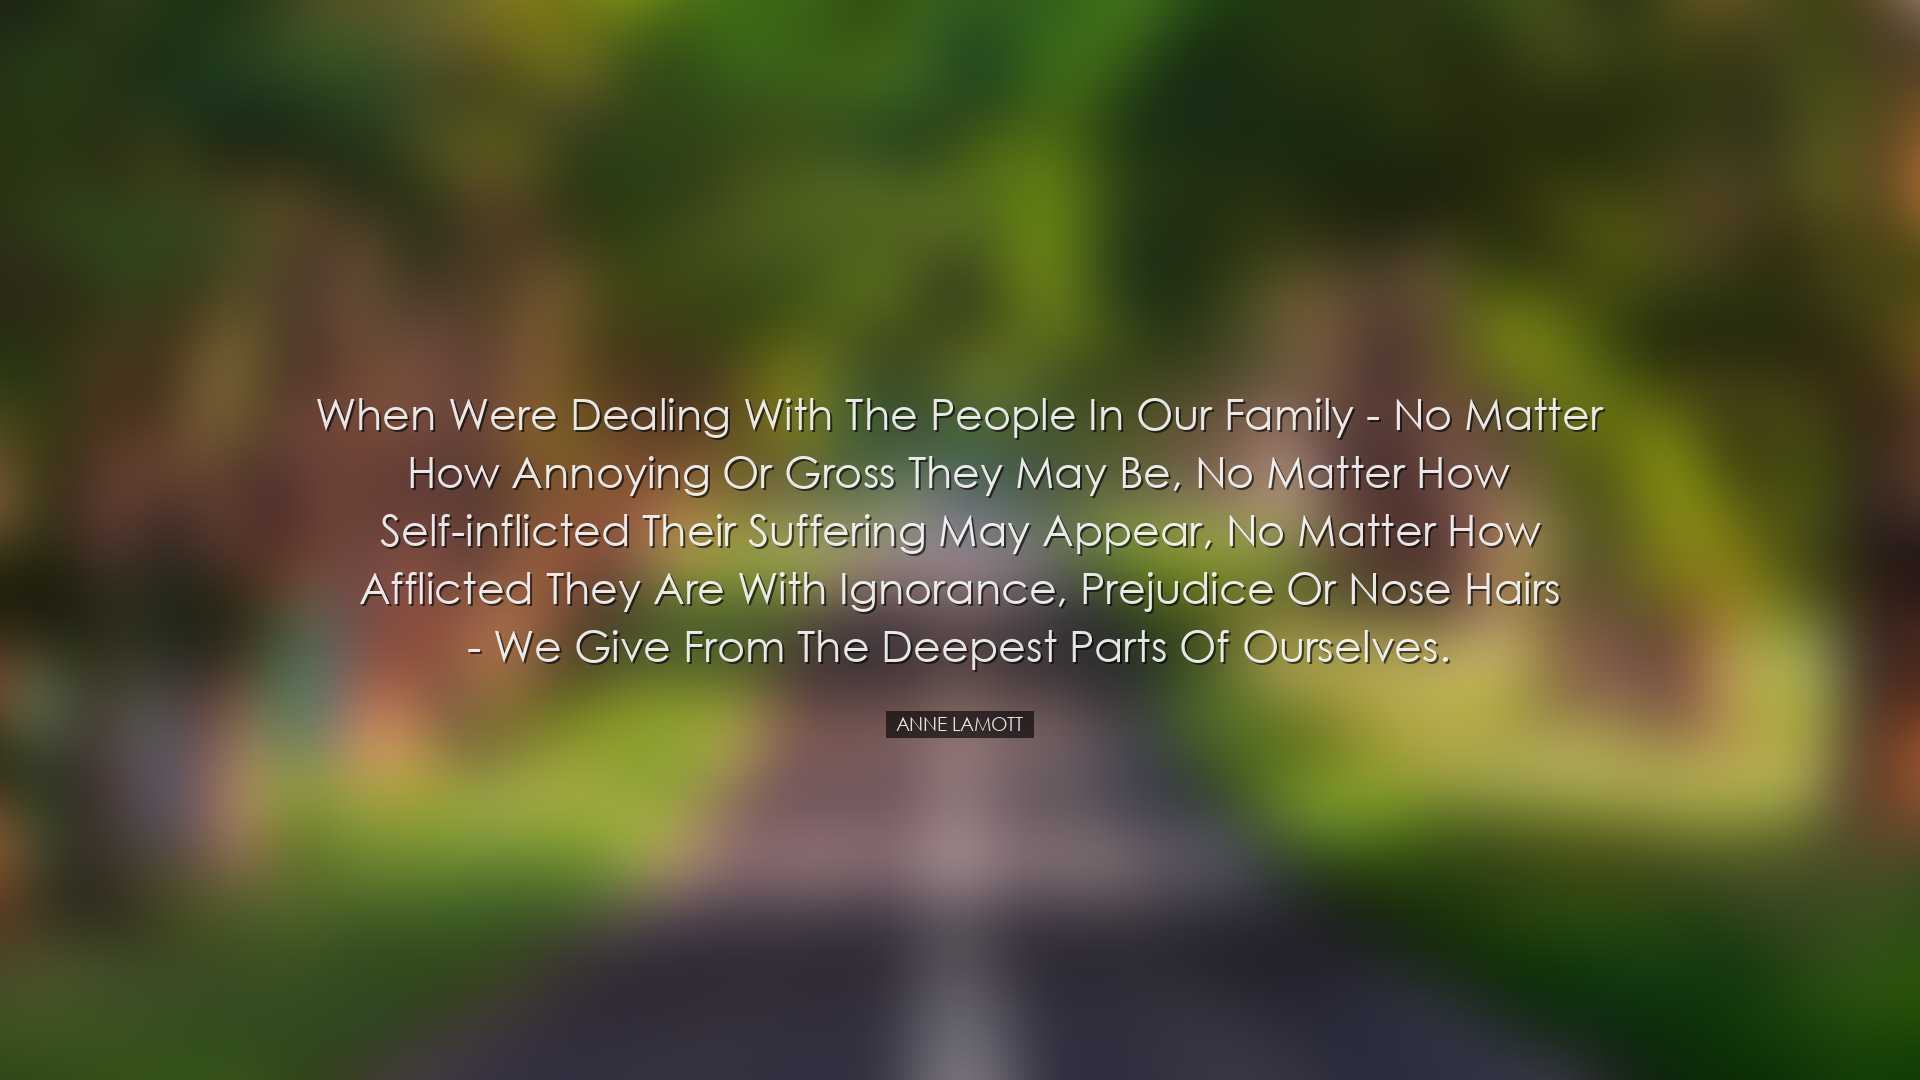 When were dealing with the people in our family - no matter how an